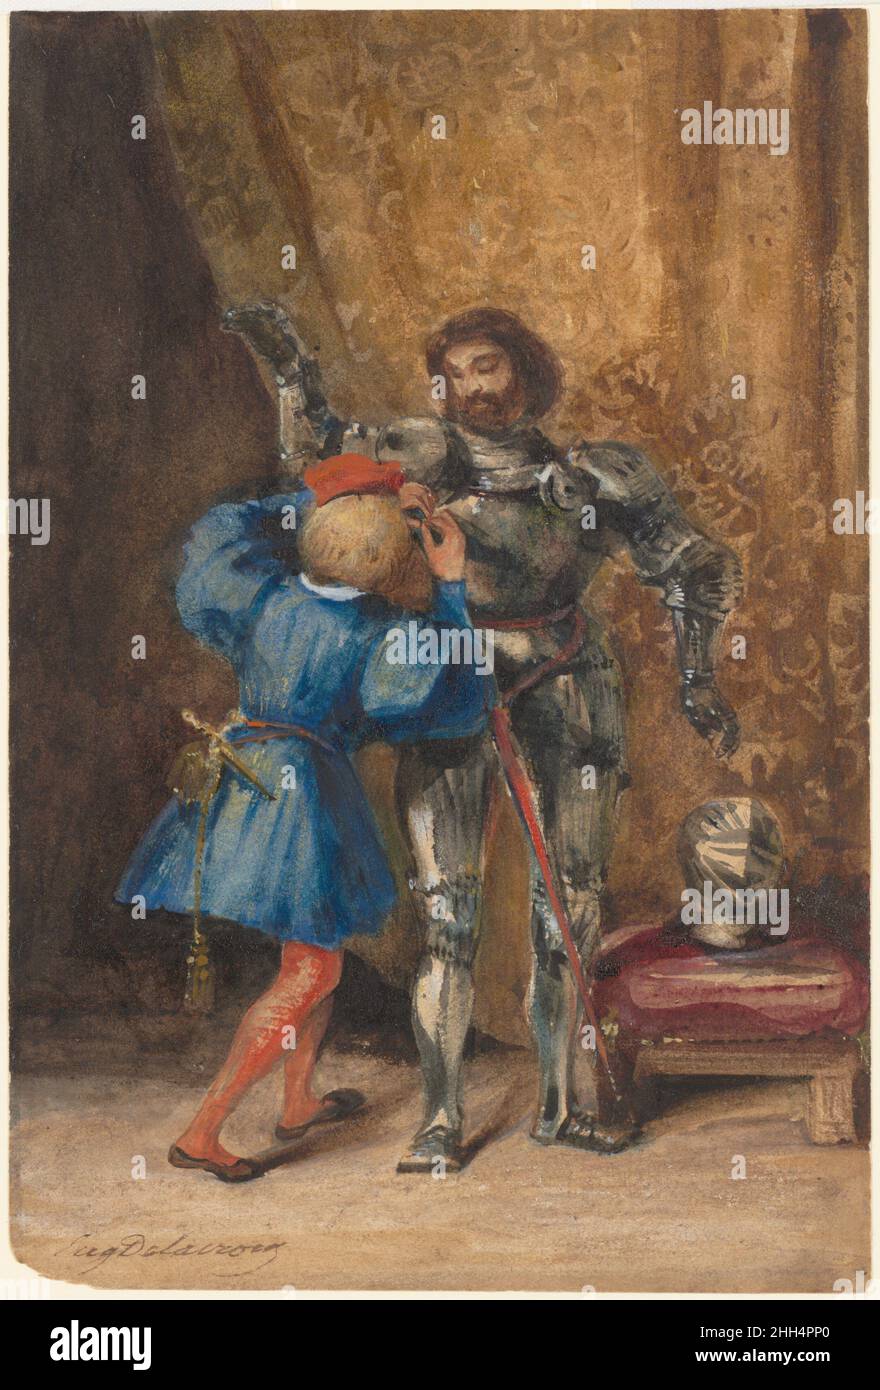 Goetz von Berlichingen Being Dressed in Armor by His Page George 1826–27 Eugène Delacroix French Delacroix made highly finished watercolors such as this one for exhibition and sale beginning in the 1820s. A depiction of the title character from Goethe’s drama 'Goetz von Berlichingen,' it demonstrates the artist’s dexterity in the medium, integrating opaque and transparent color with various types of brushwork. In rich jewel tones befitting the medieval setting, he skillfully described the texture of the brocade curtain and the glint of the armor, its specificity no doubt a product of his studi Stock Photo